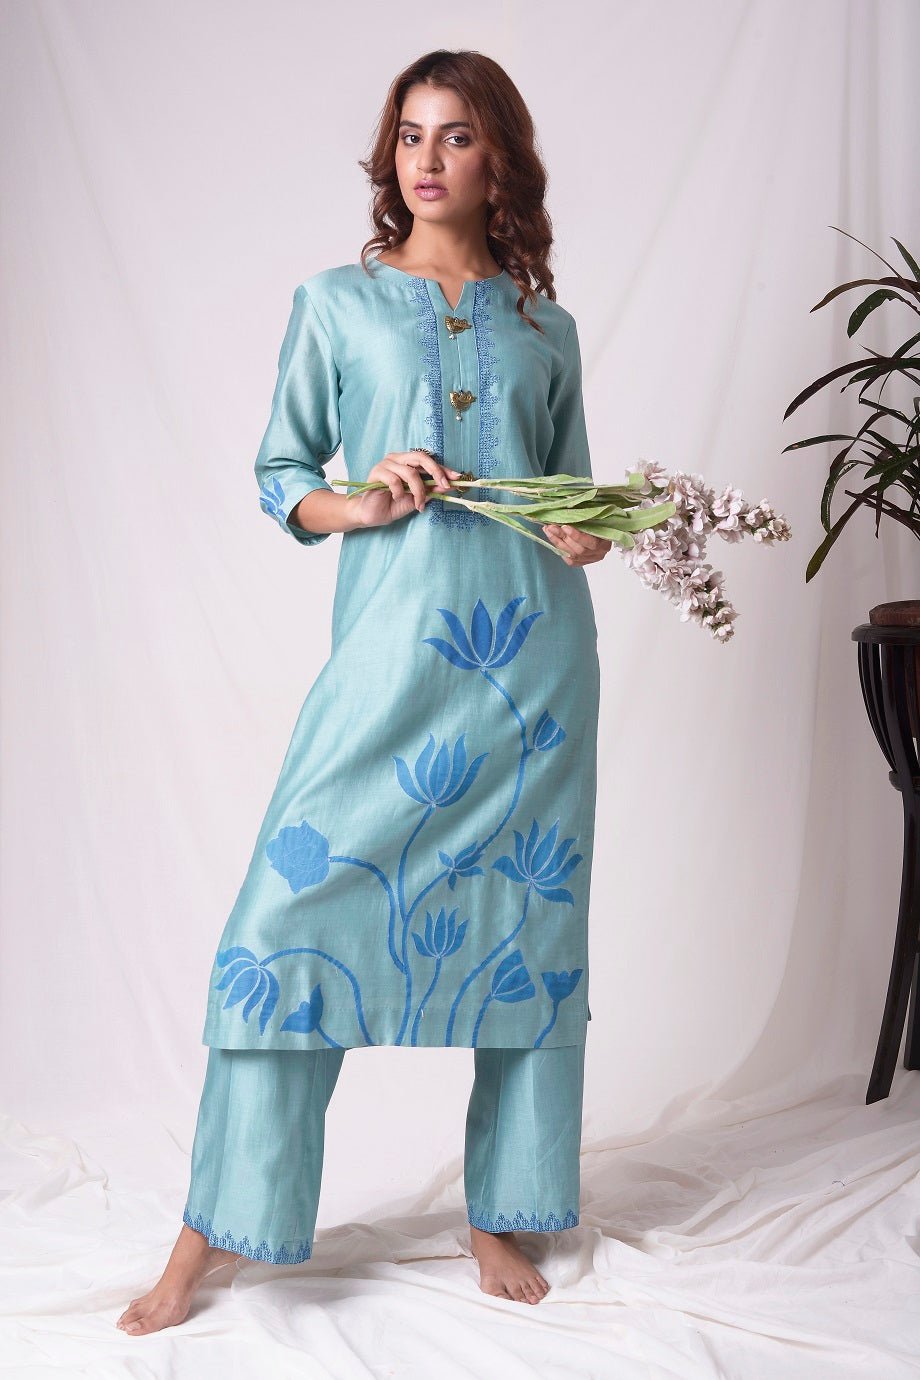 Buy aqua blue chanderi suit online in USA. Be the talk of parties and weddings with exquisite designer gowns, sharara suits, Anarkali suits, salwar suits from Pure Elegance Indian clothing store in USA. Shop online now.-full view